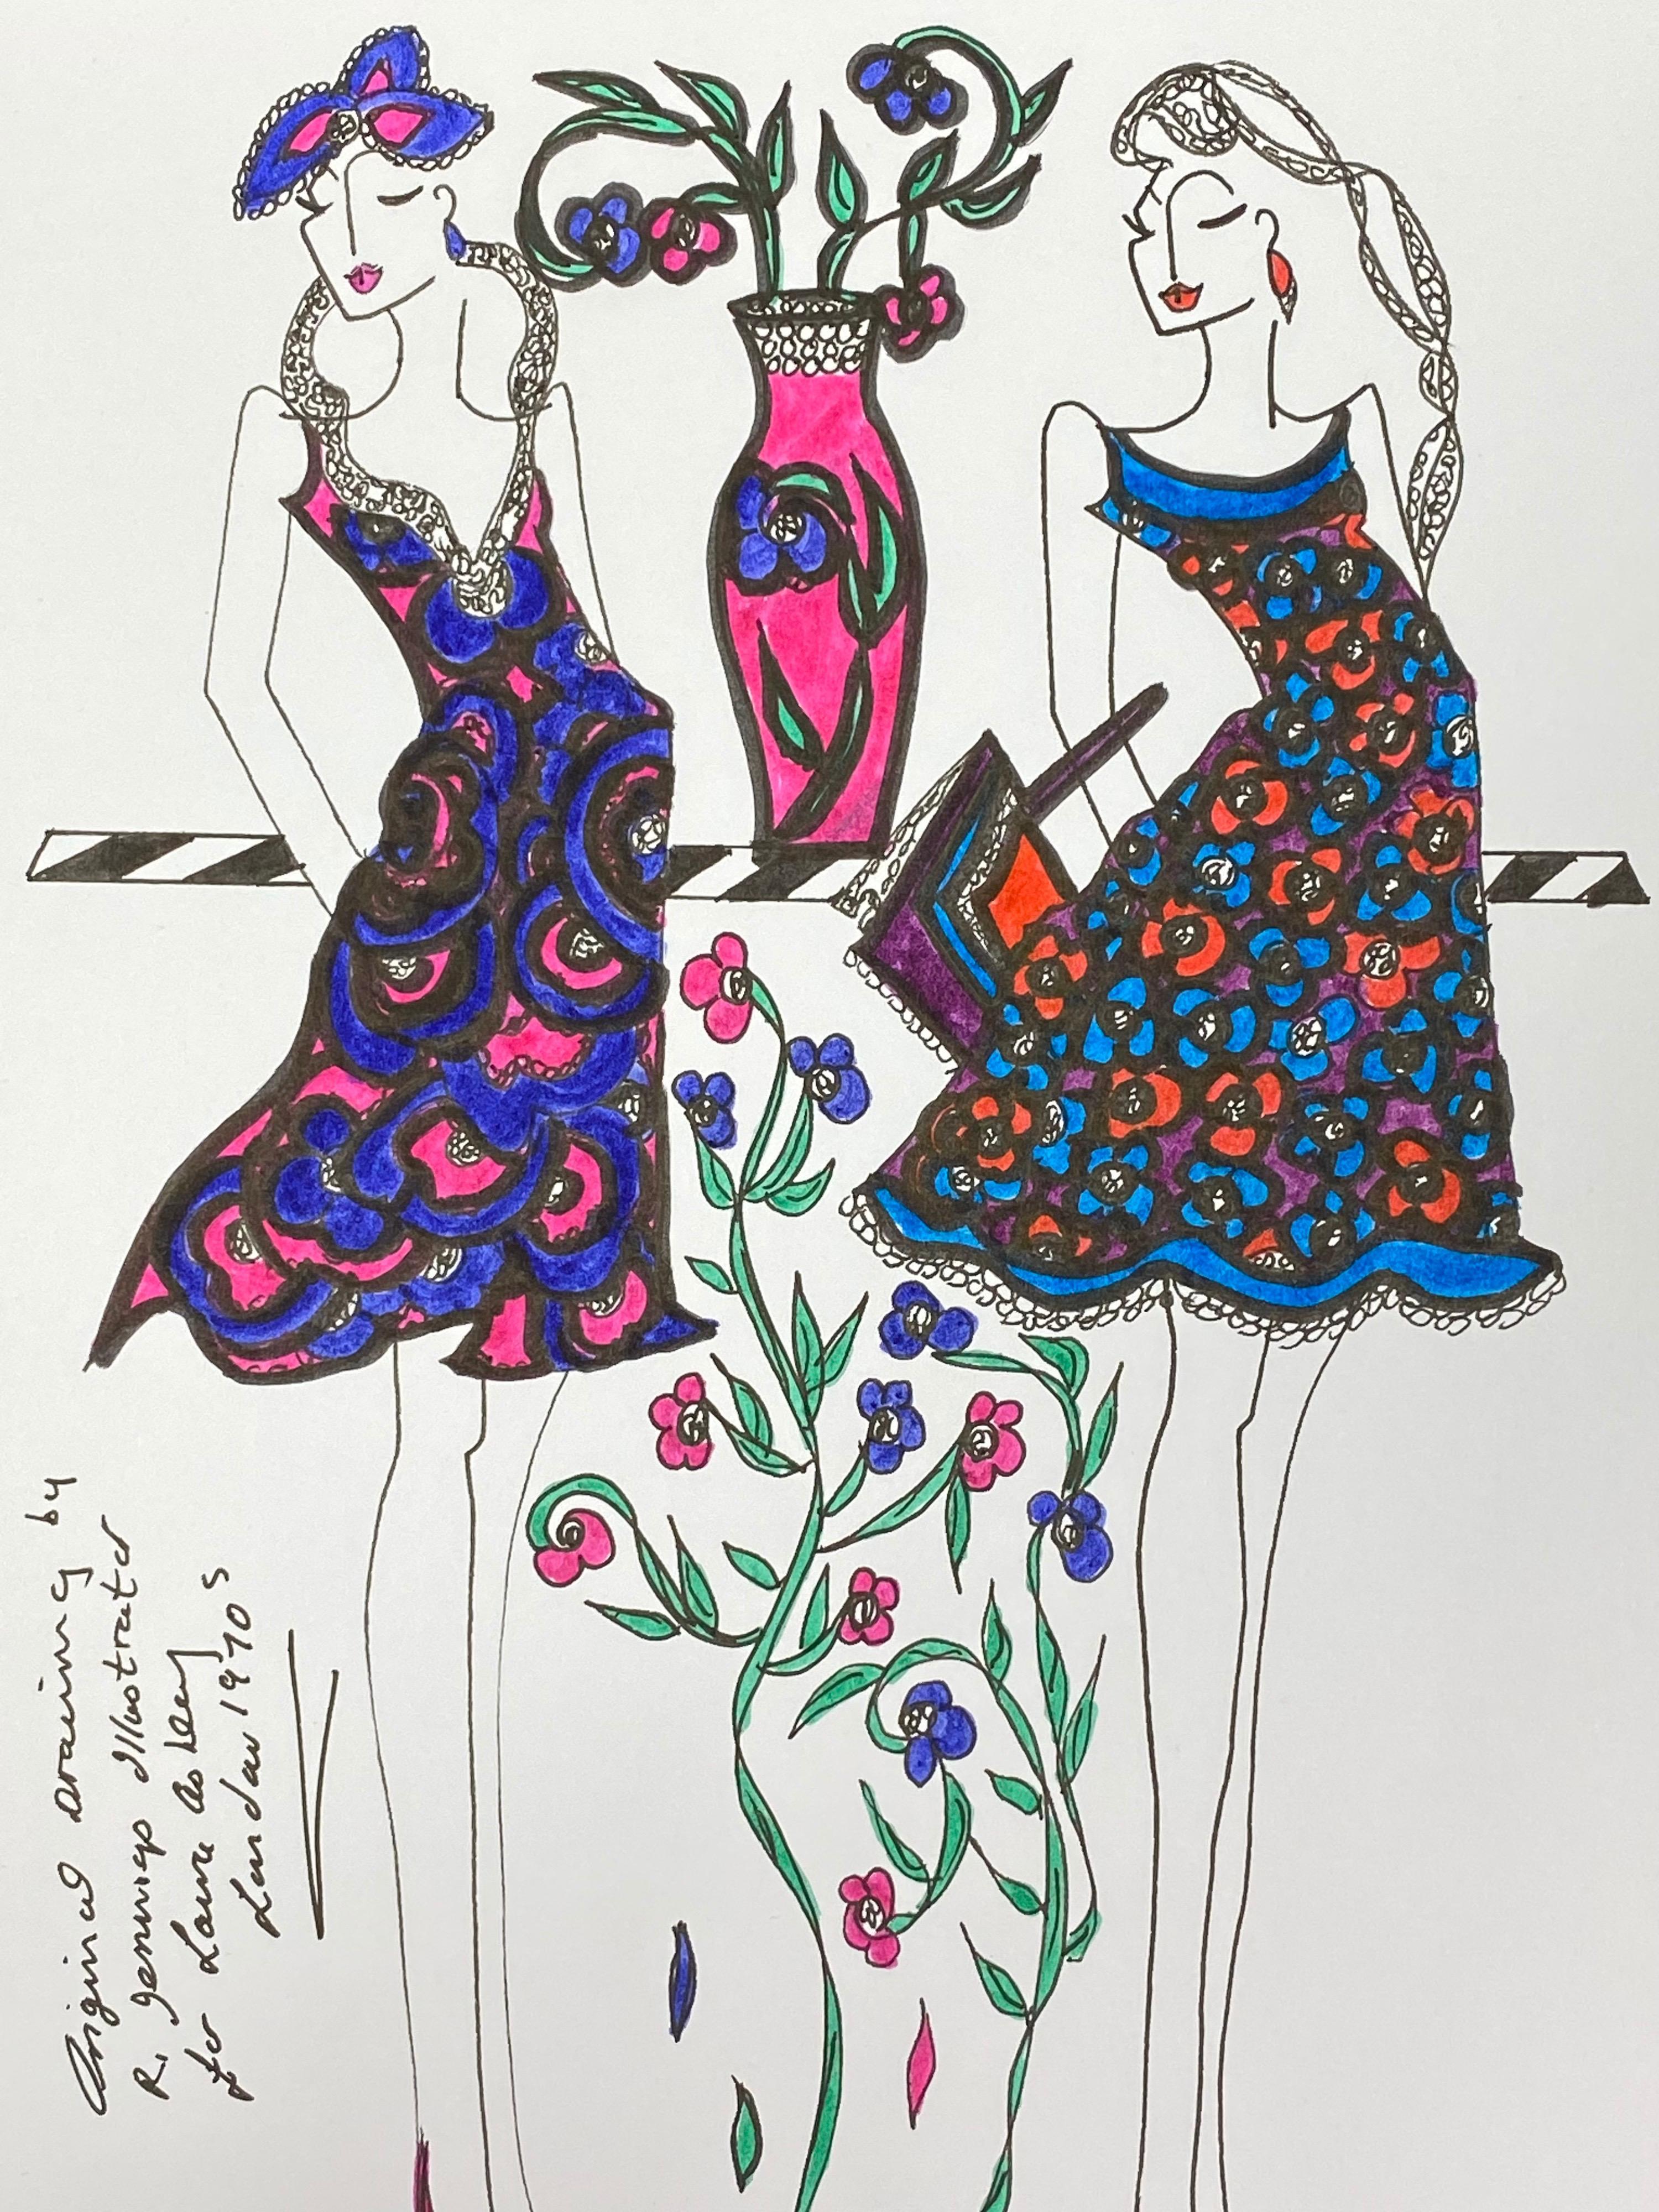 Original Fashion Design Illustration
by Roz Jennings, British
watercolor and ink on card, unframed
size: 12 x 8.25 inches
condition: very good

A beautifully colorful and characterful original artwork by British fashion designer, Roz Jennings.